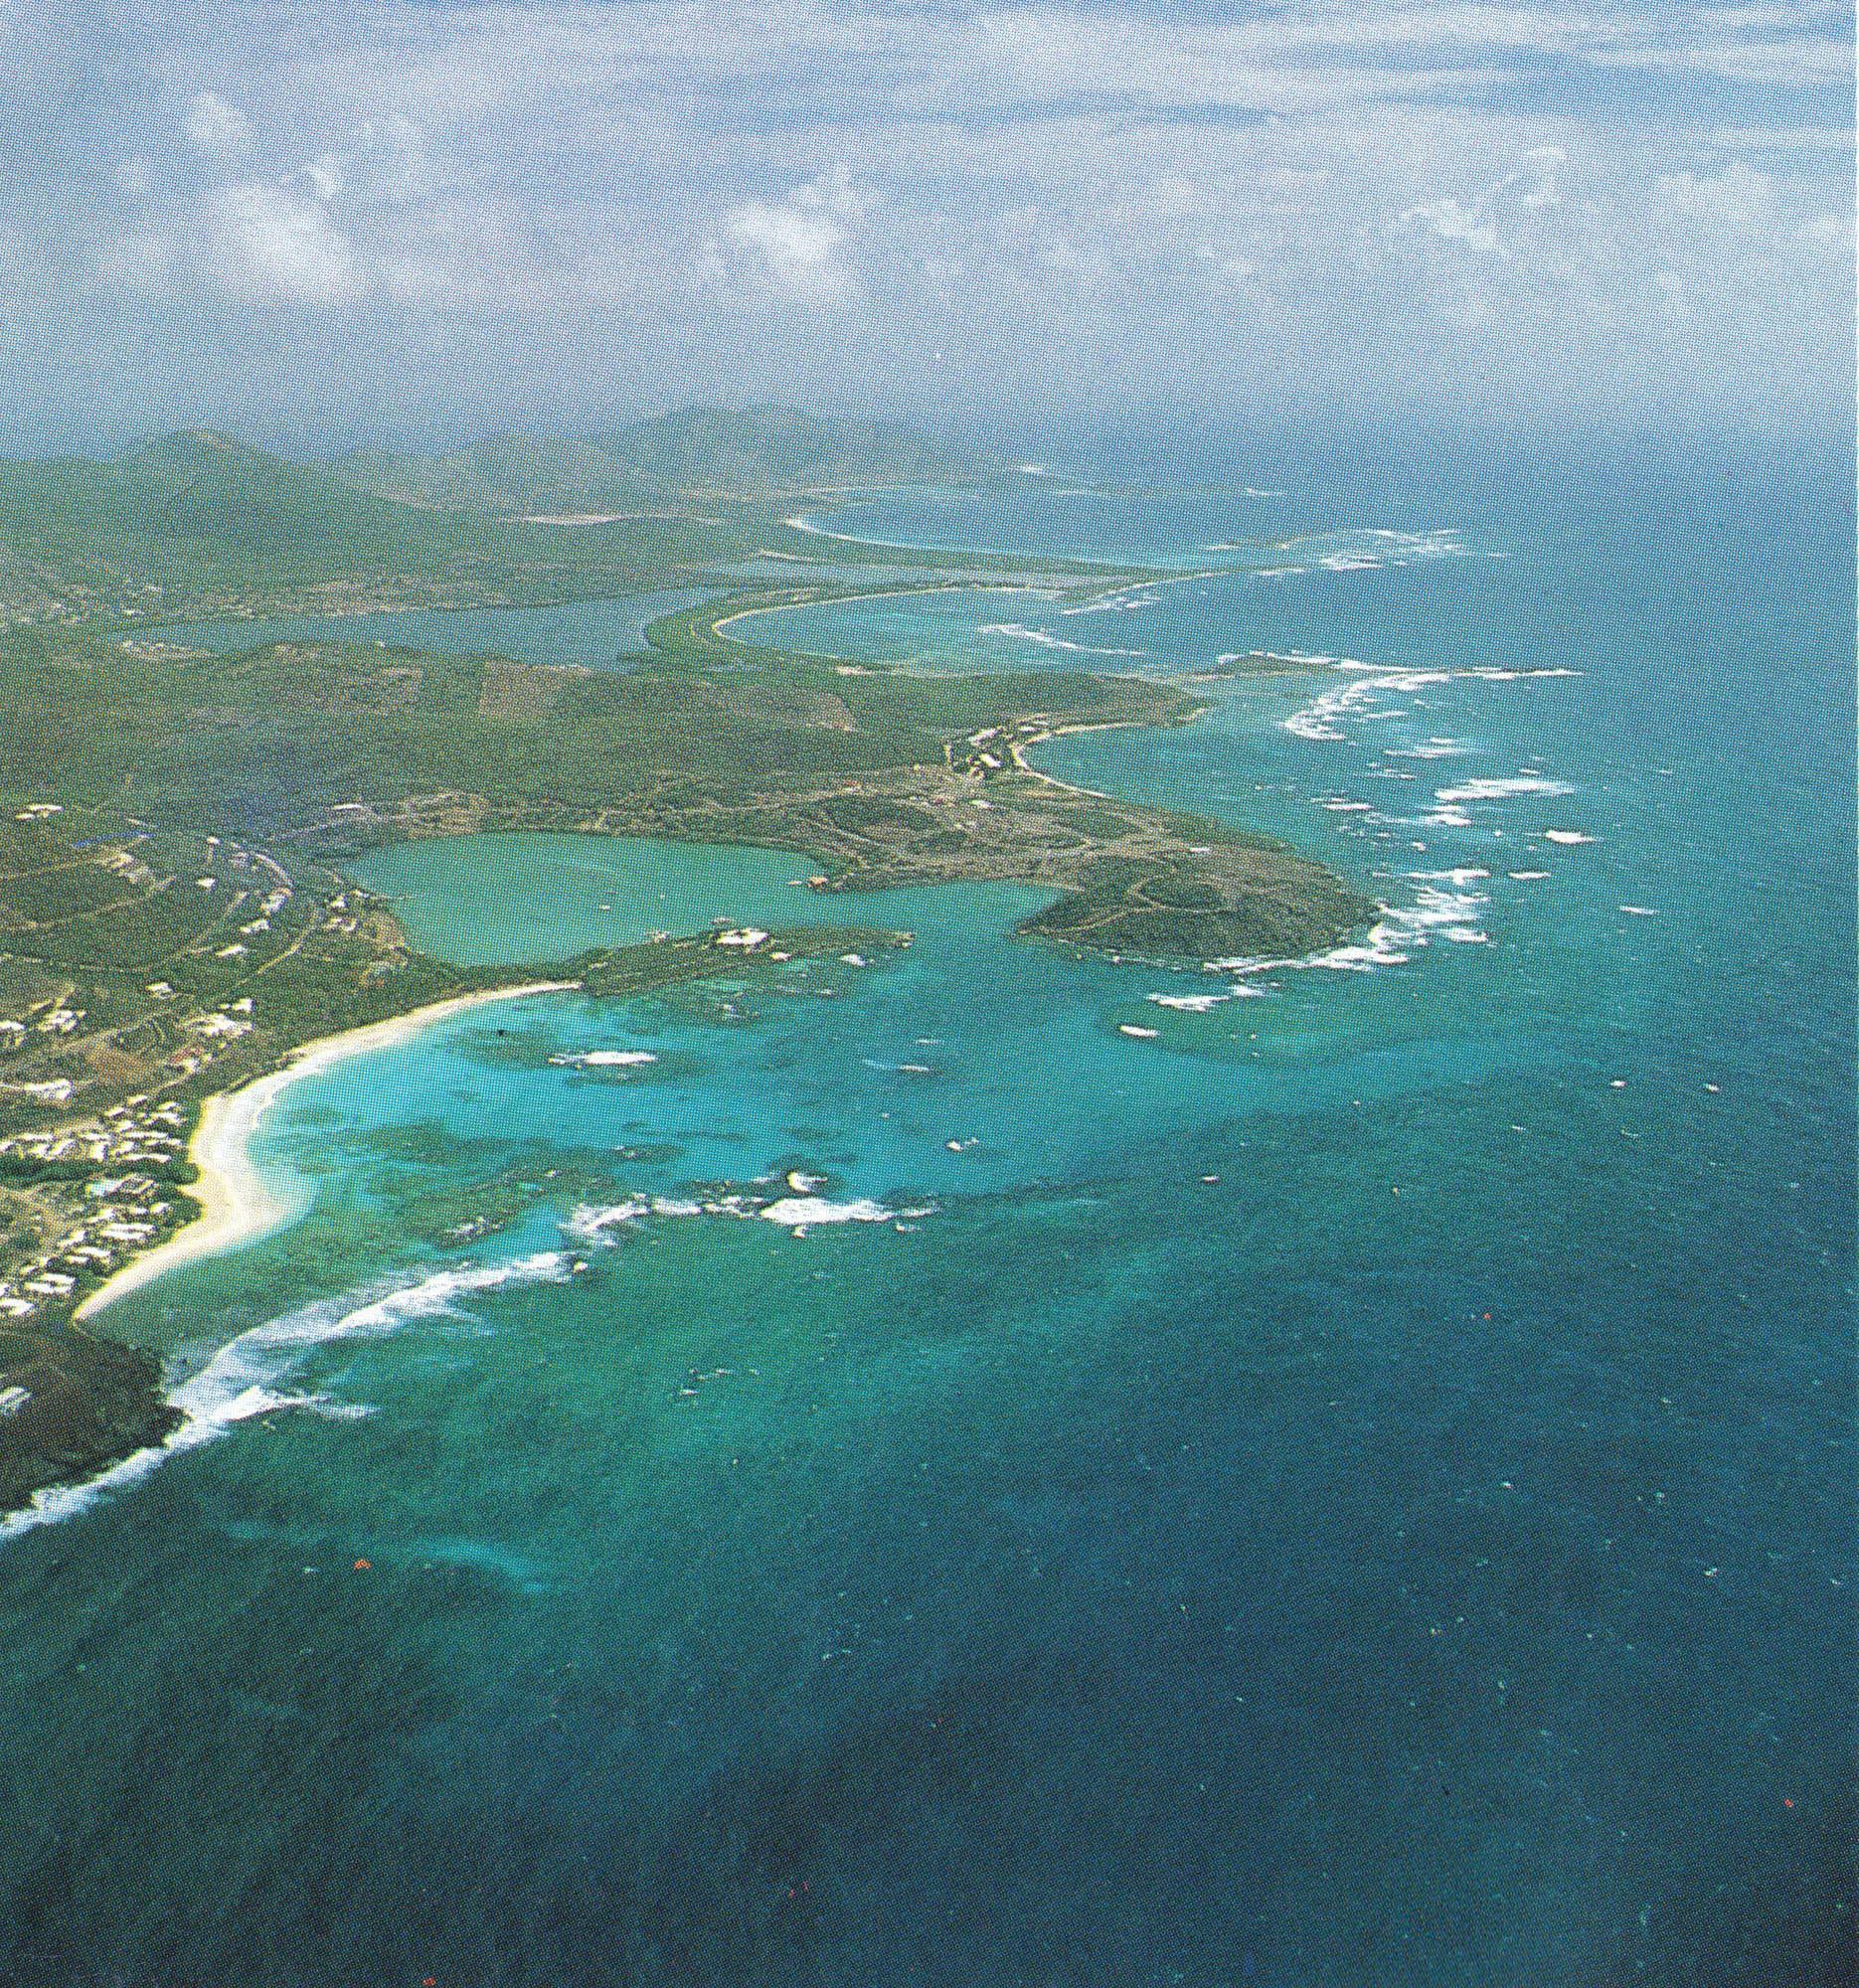 East Coast View – St. Martin Image Collection